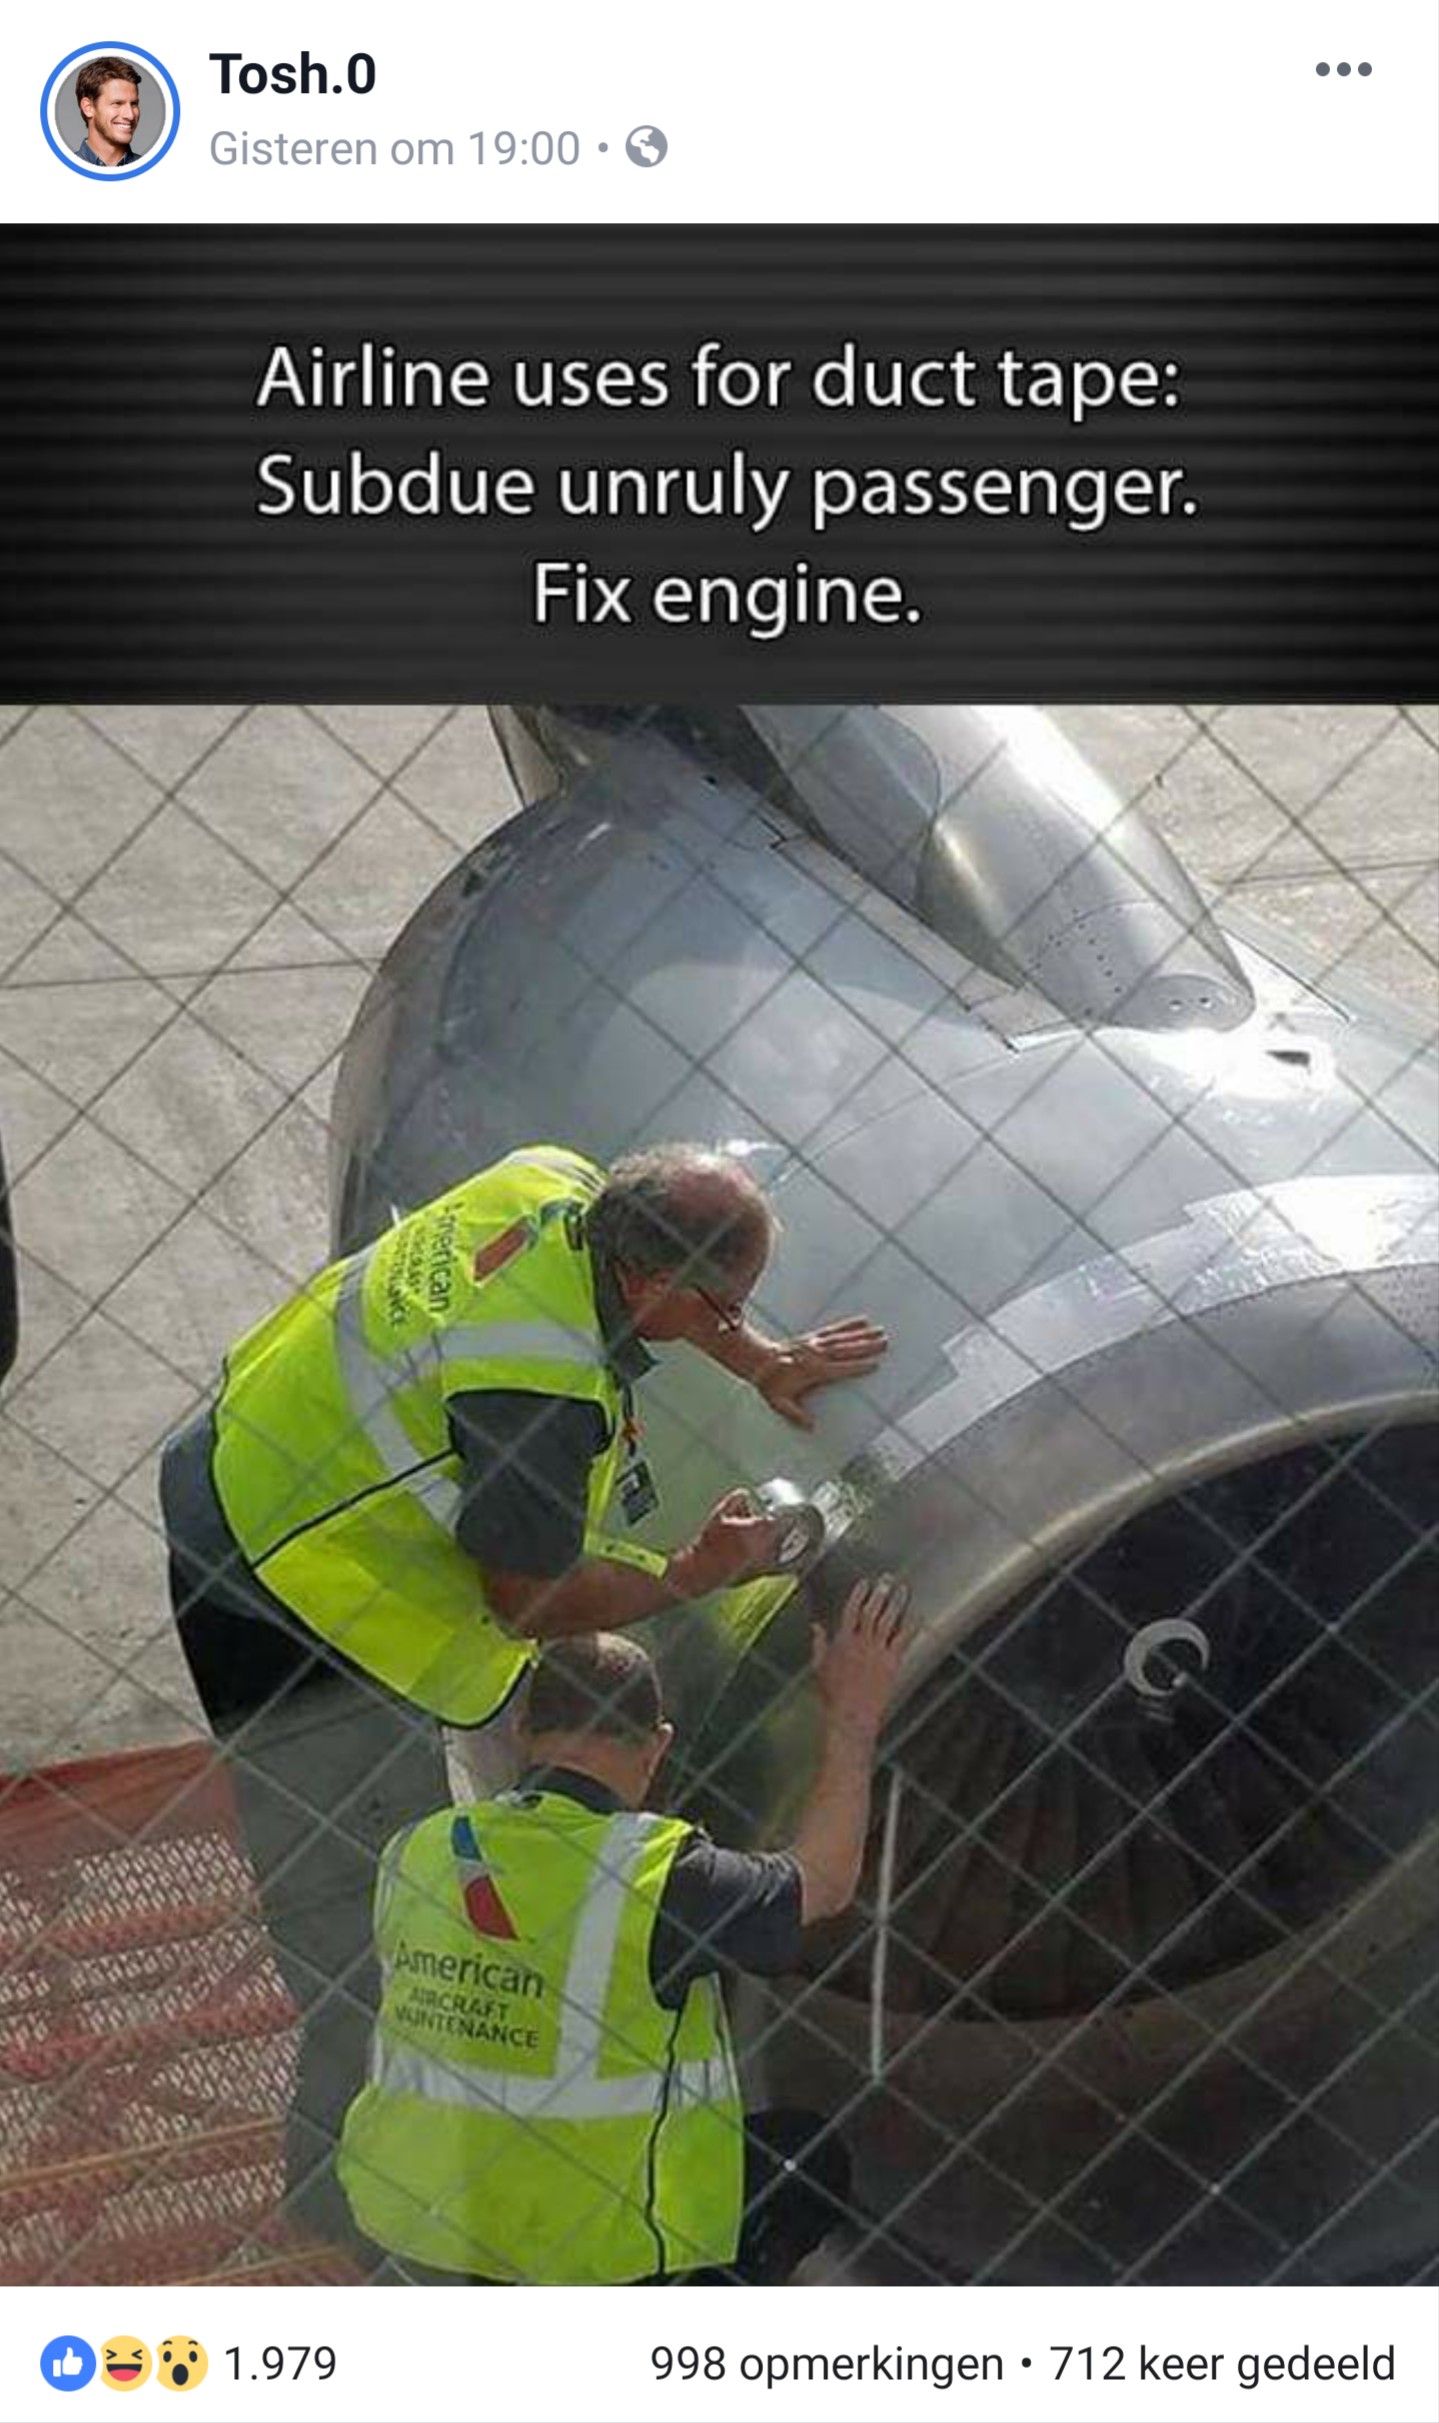 duct tape airplane - Tosh.o Gisteren om Airline uses for duct tape Subdue unruly passenger. Fix engine. 091.979 998 opmerkingen. 712 keer gedeeld